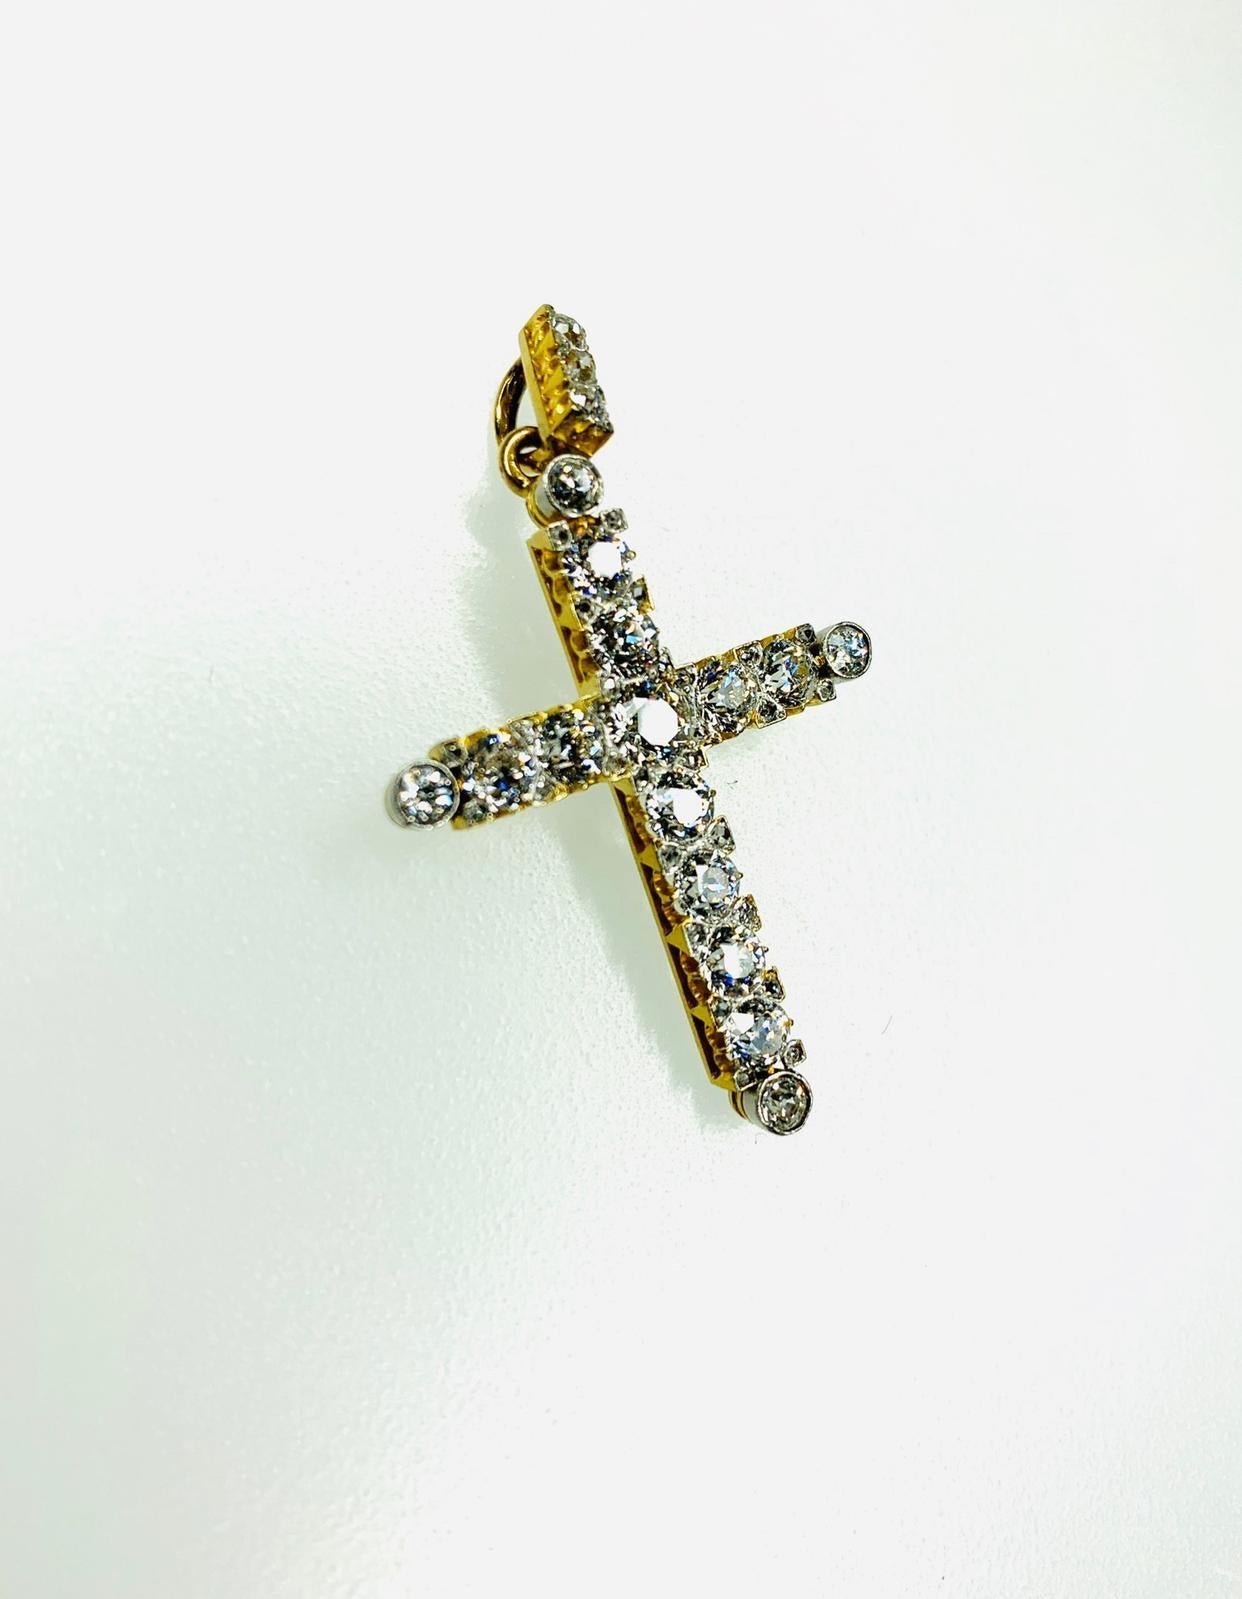 Gemolithos Late Victorian Gold and Platinum Cross Pendant In Excellent Condition For Sale In Munich, DE